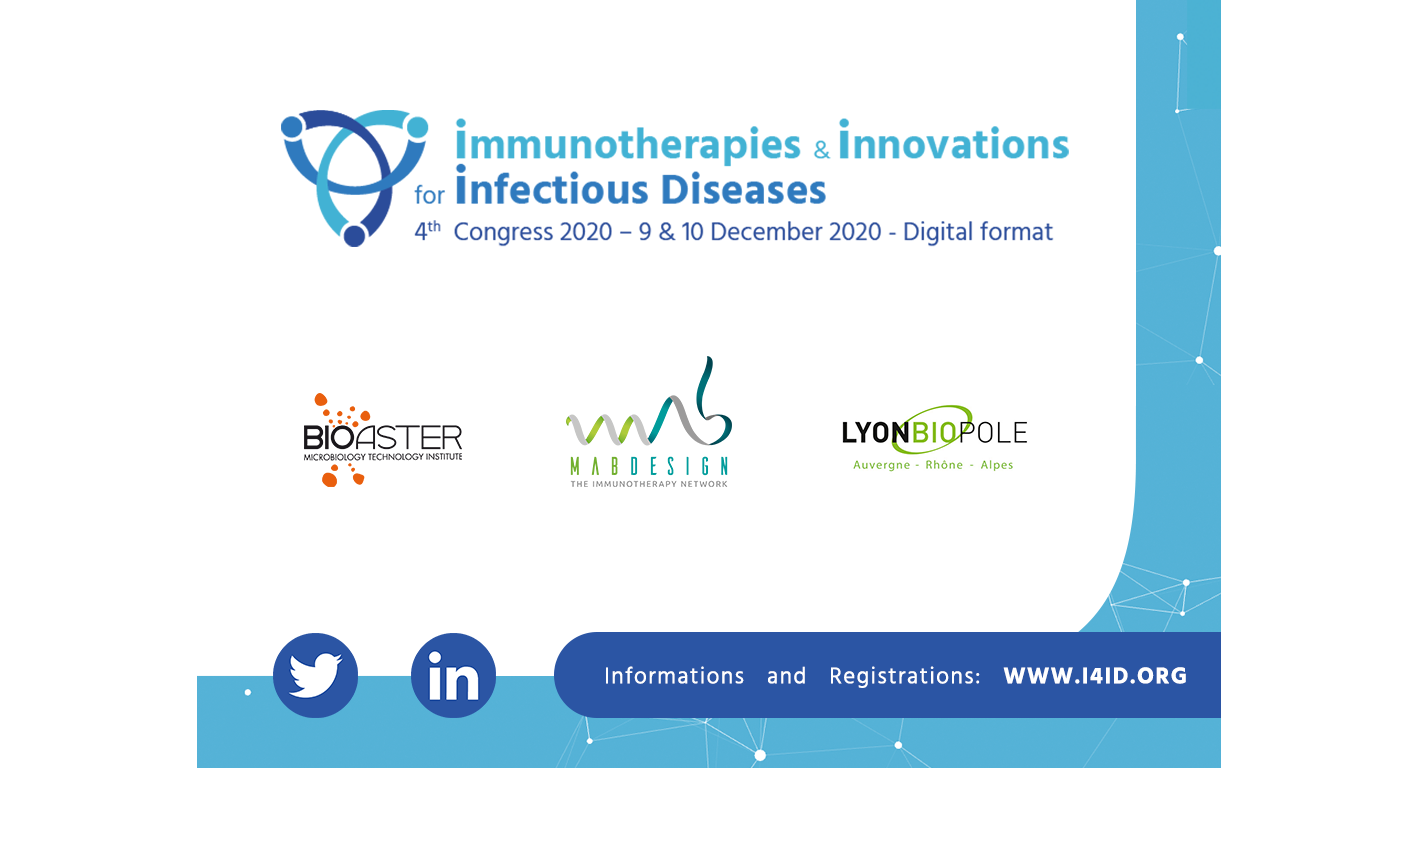 Immunotherapies & innovations for infectious Diseases